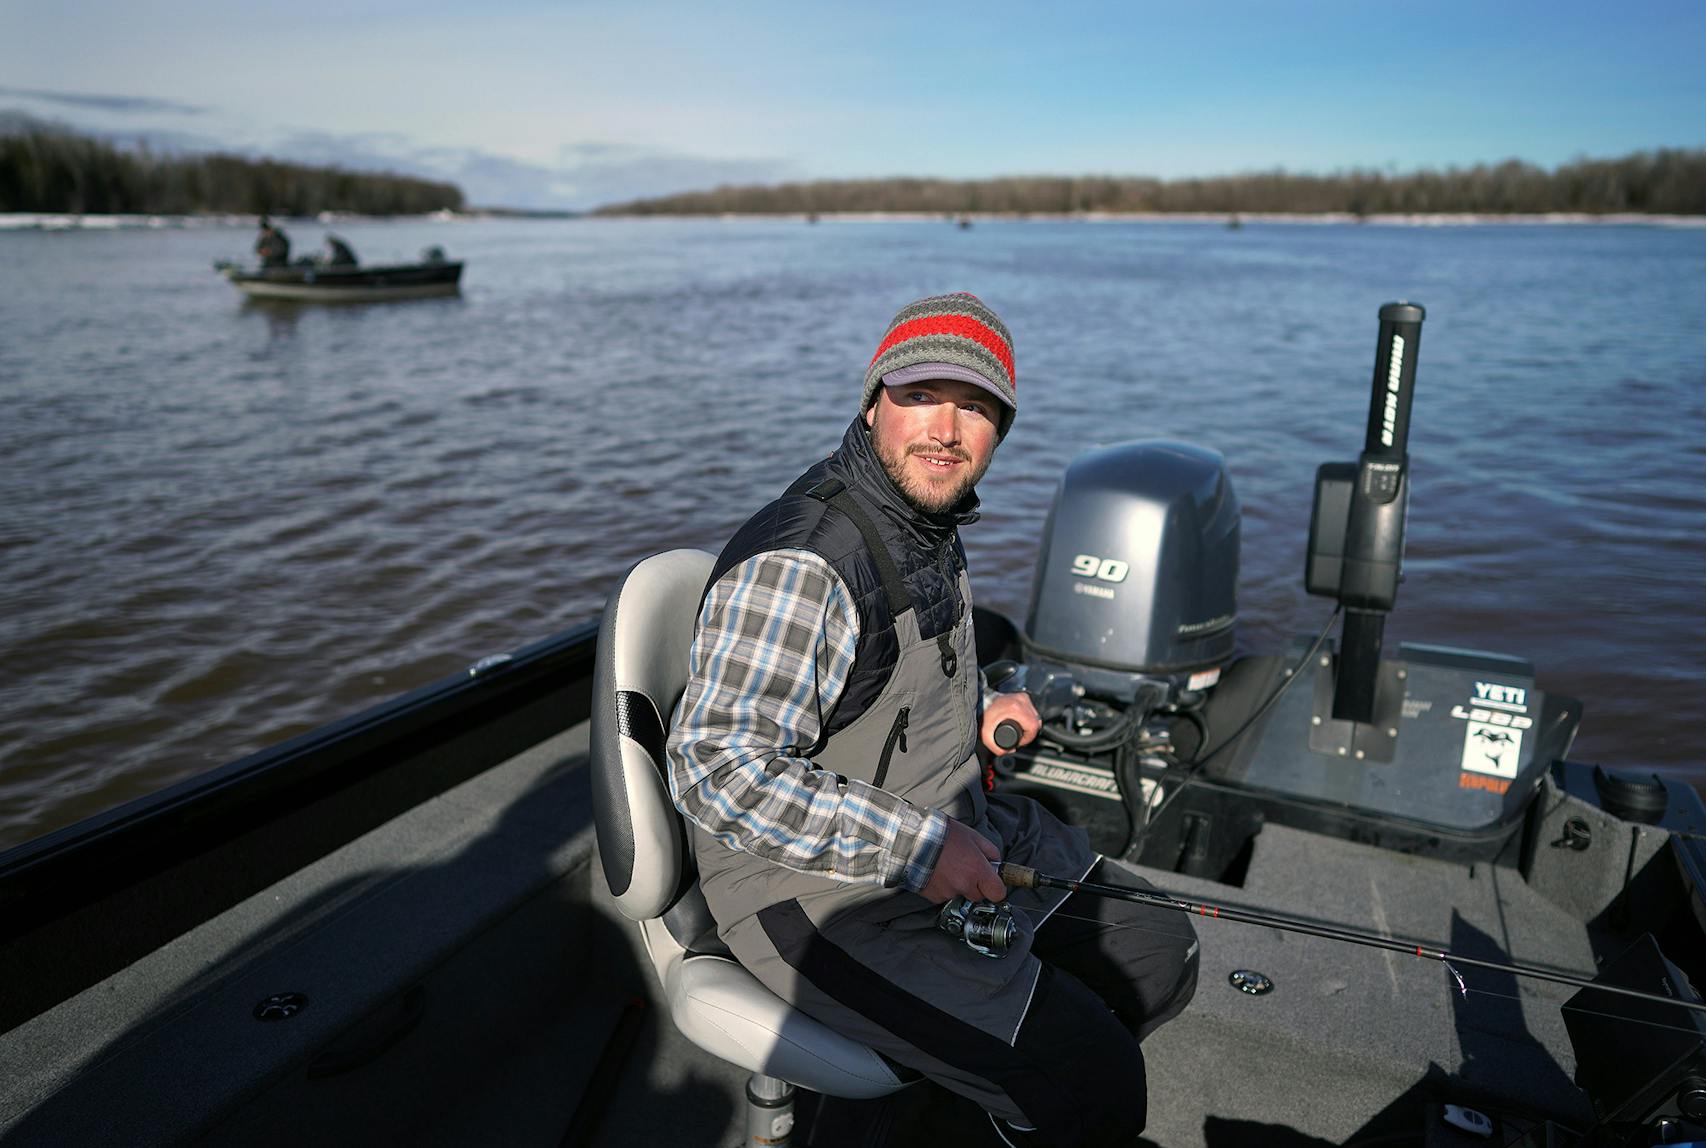 Fishing guide Justin Wiese takes customers on the Rainy River every spring. At some well-known hot spots on the Rainy River, hundreds of boats would normally line up during the ice-out season. Those days were few and far between this year, Wiese said.